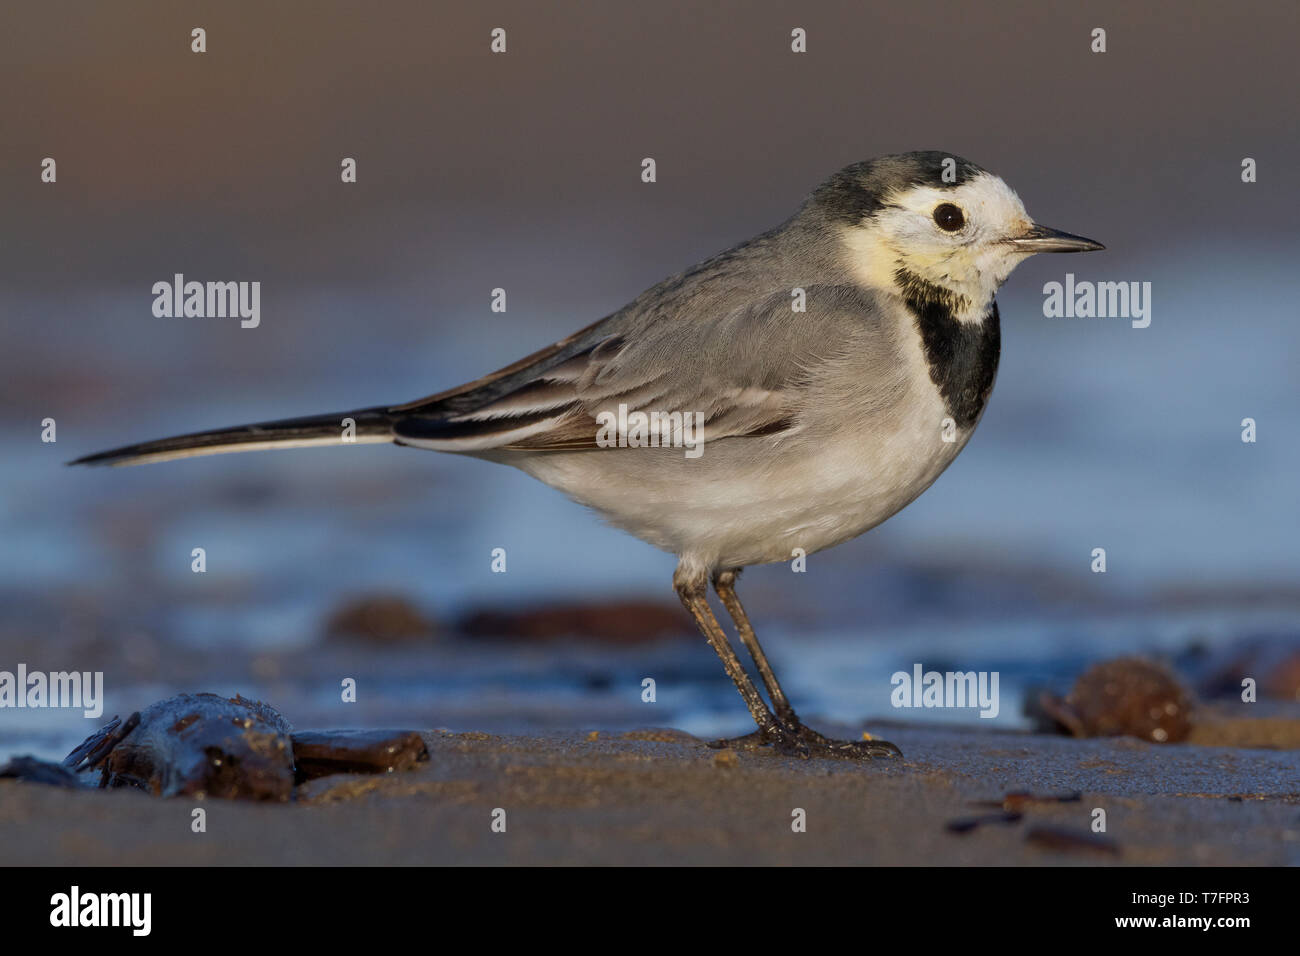 White Wagtail, Adult standing on the sand, Campania, Italy (Motacilla alba) Stock Photo